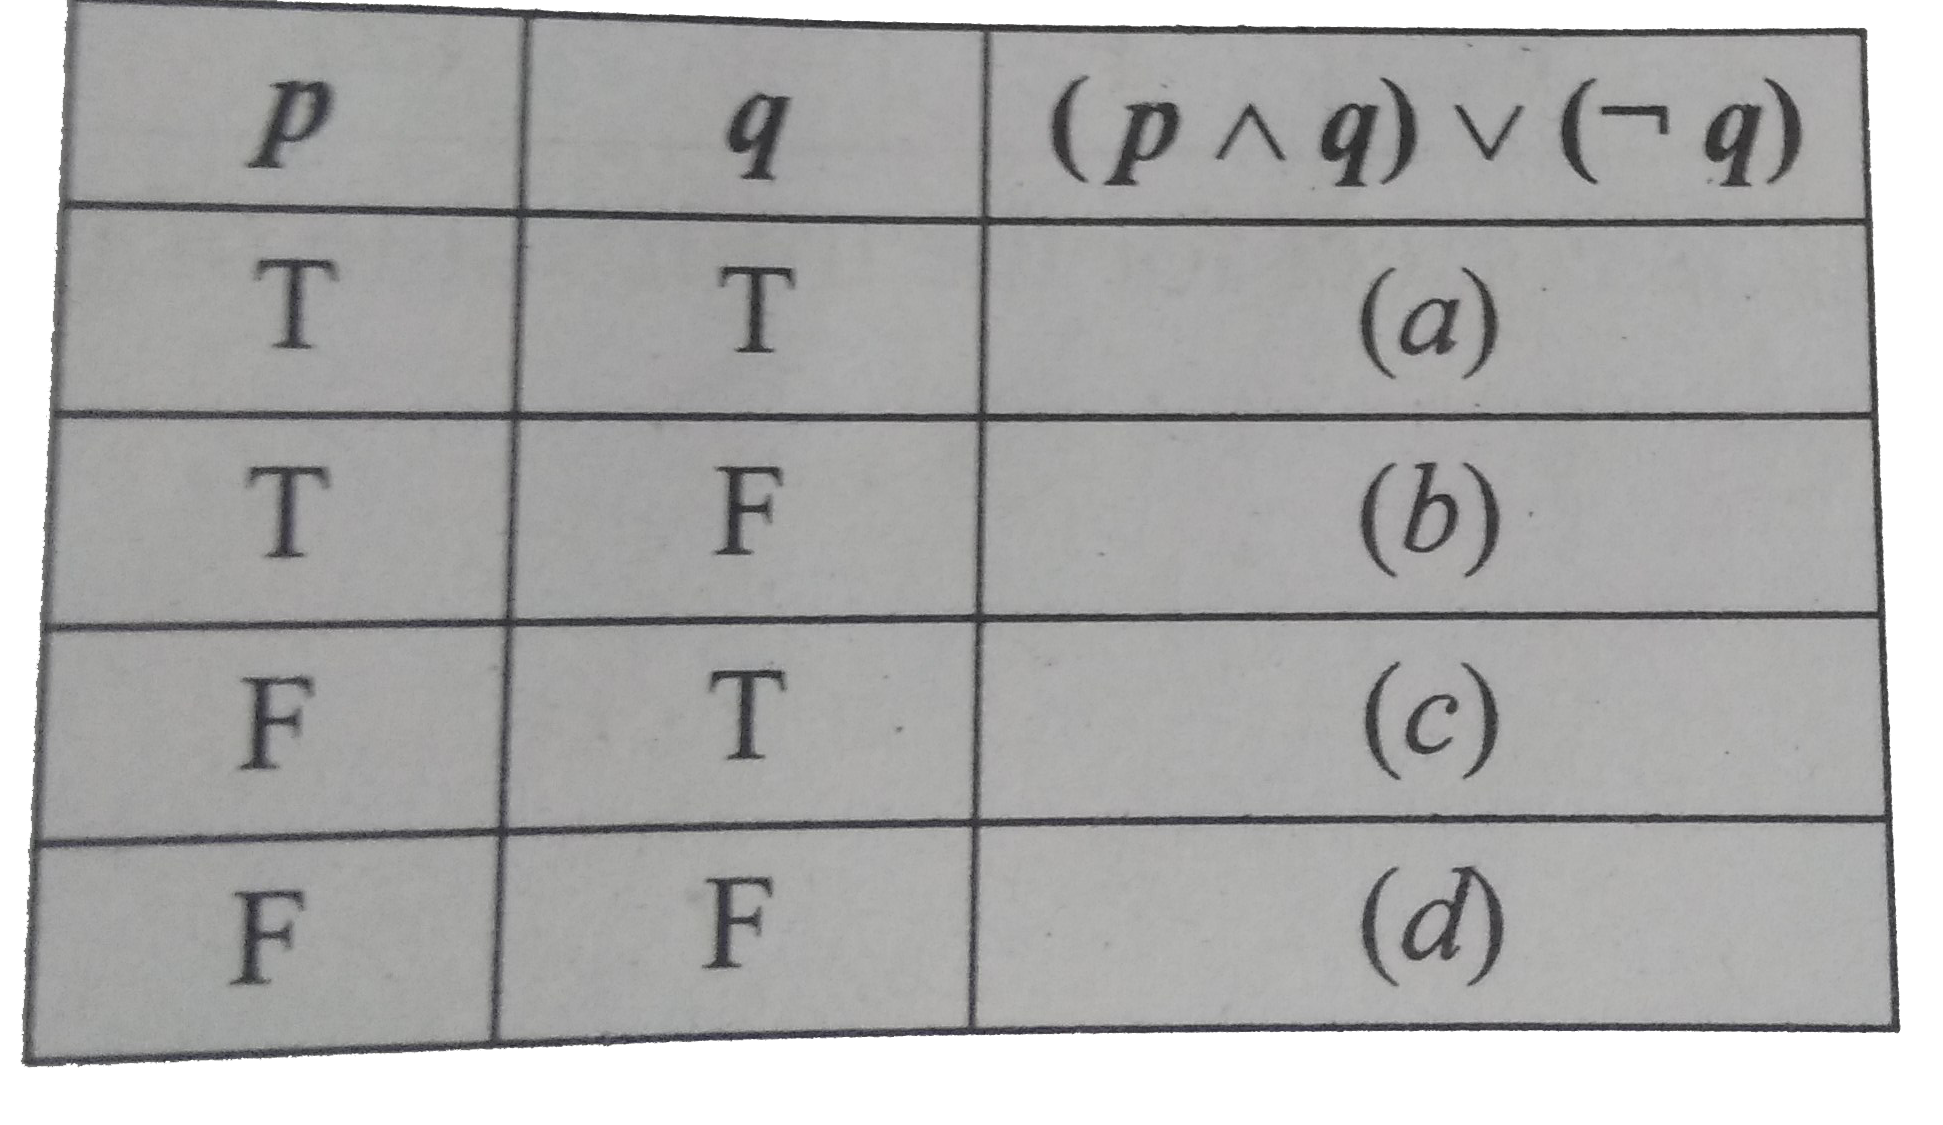 The truth table for (P^^q)vvnegq is given below    Which of the following is true?